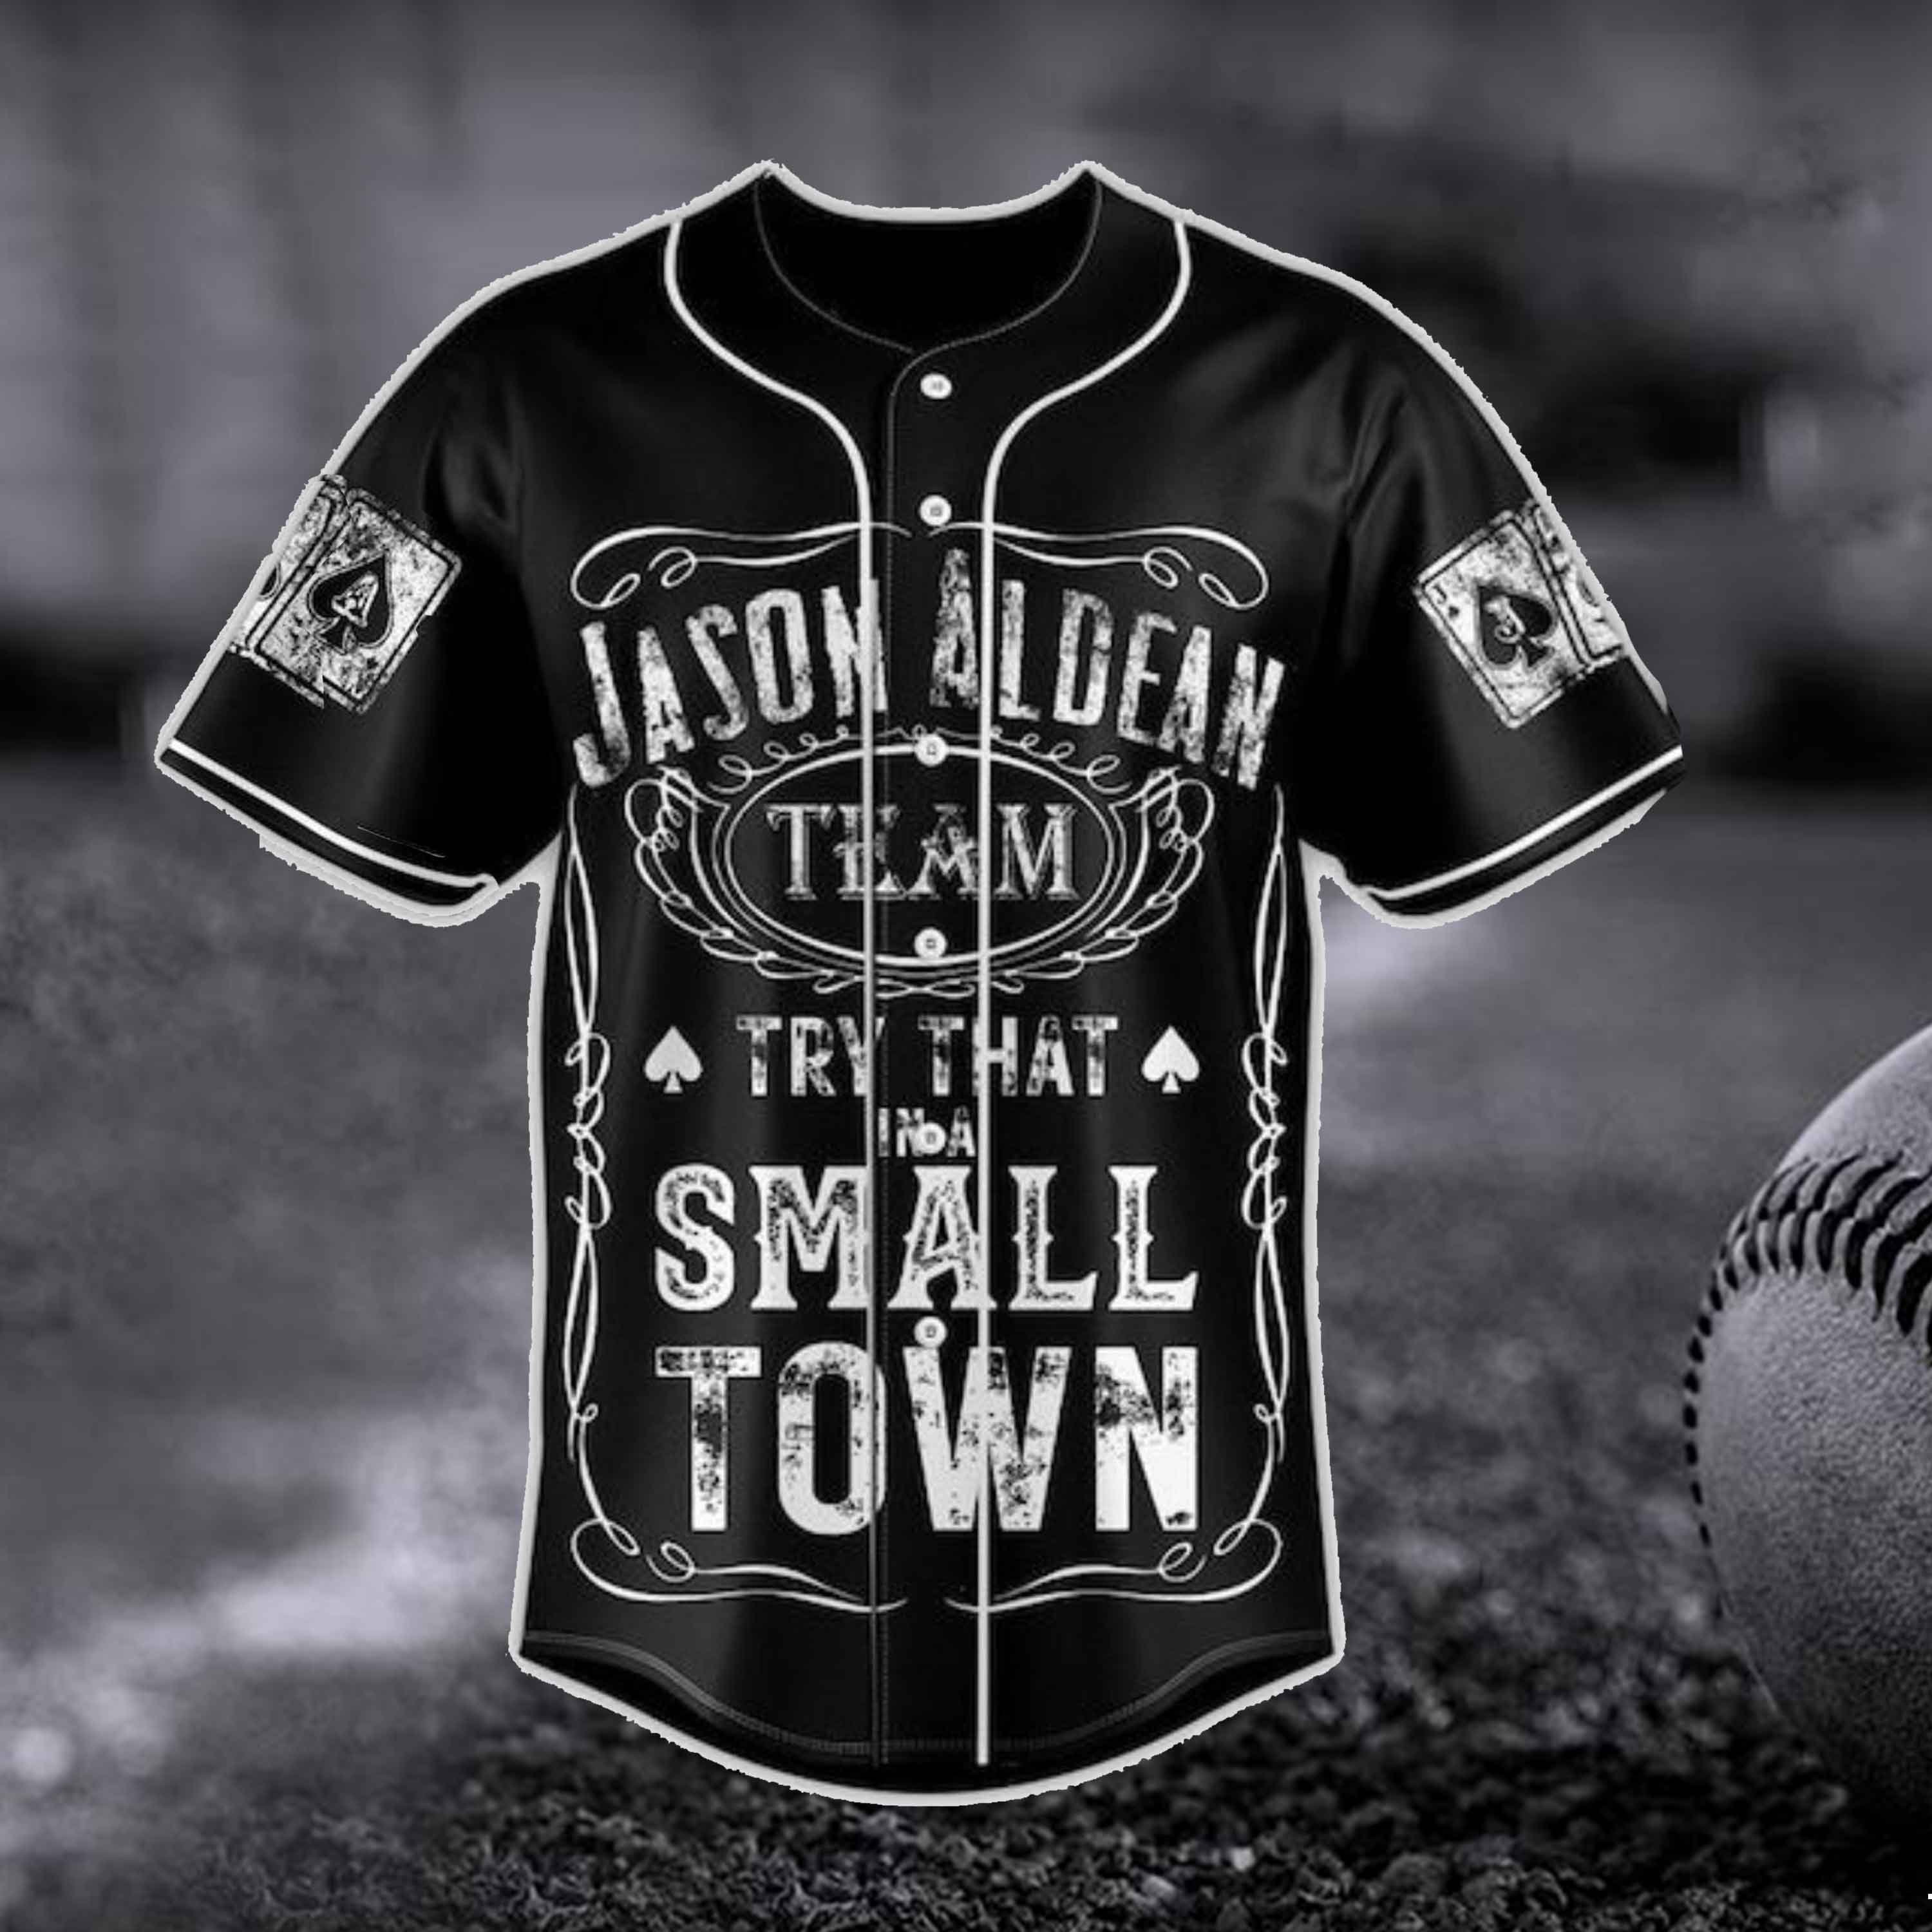 Jason Team Try That In A Small Town Baseball Jersey